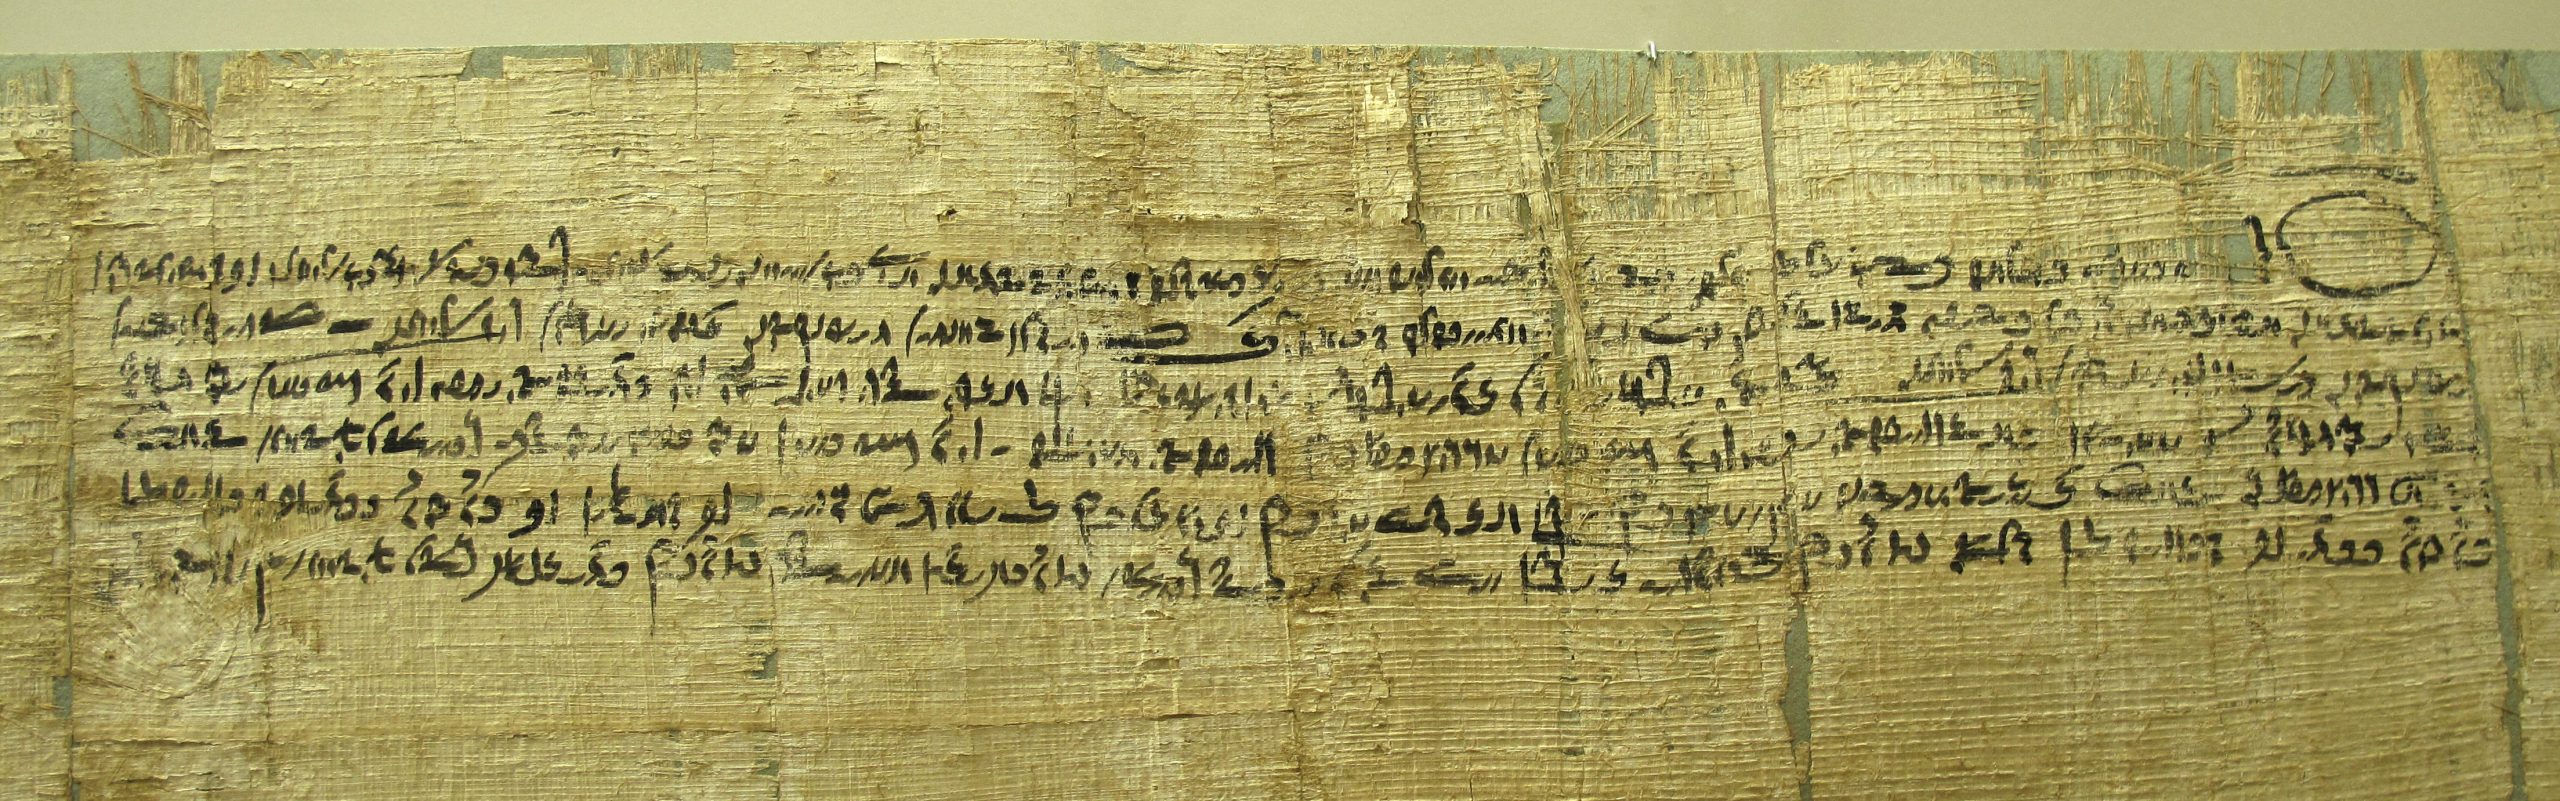 Image of Demotic Written on Papyrus